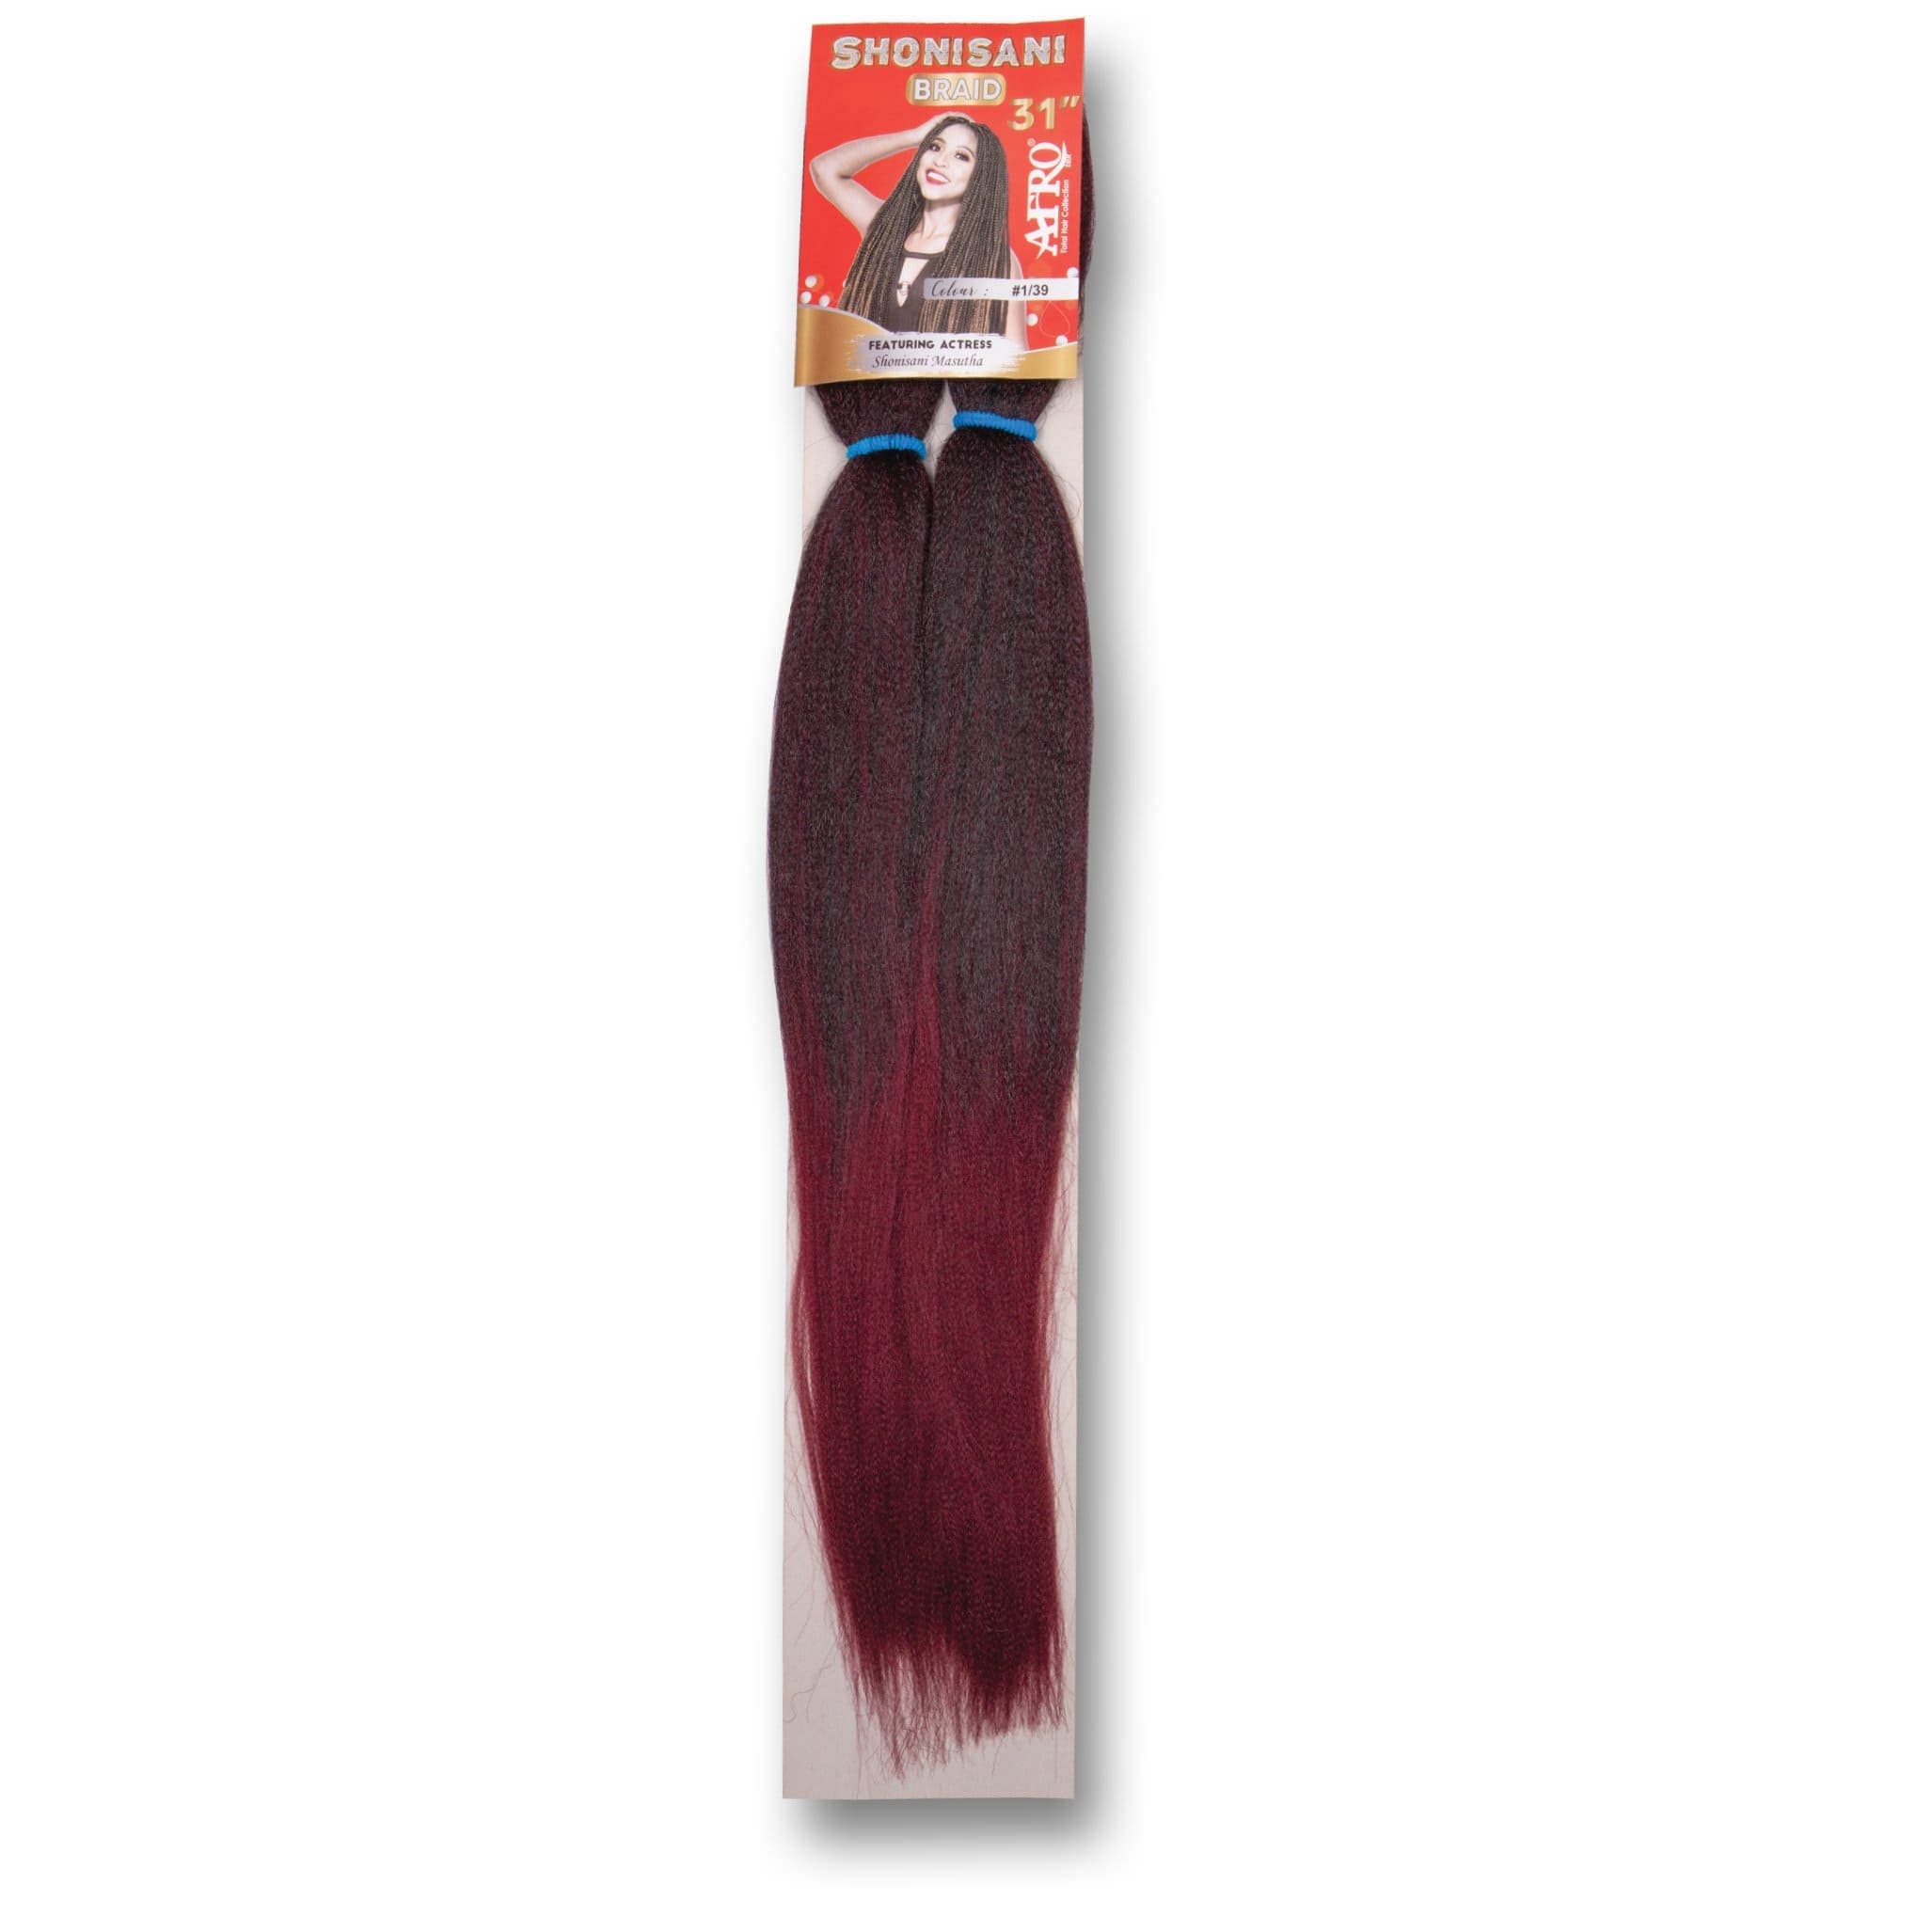 Afrotex, Shonisani Braid 31" - Cosmetic Connection